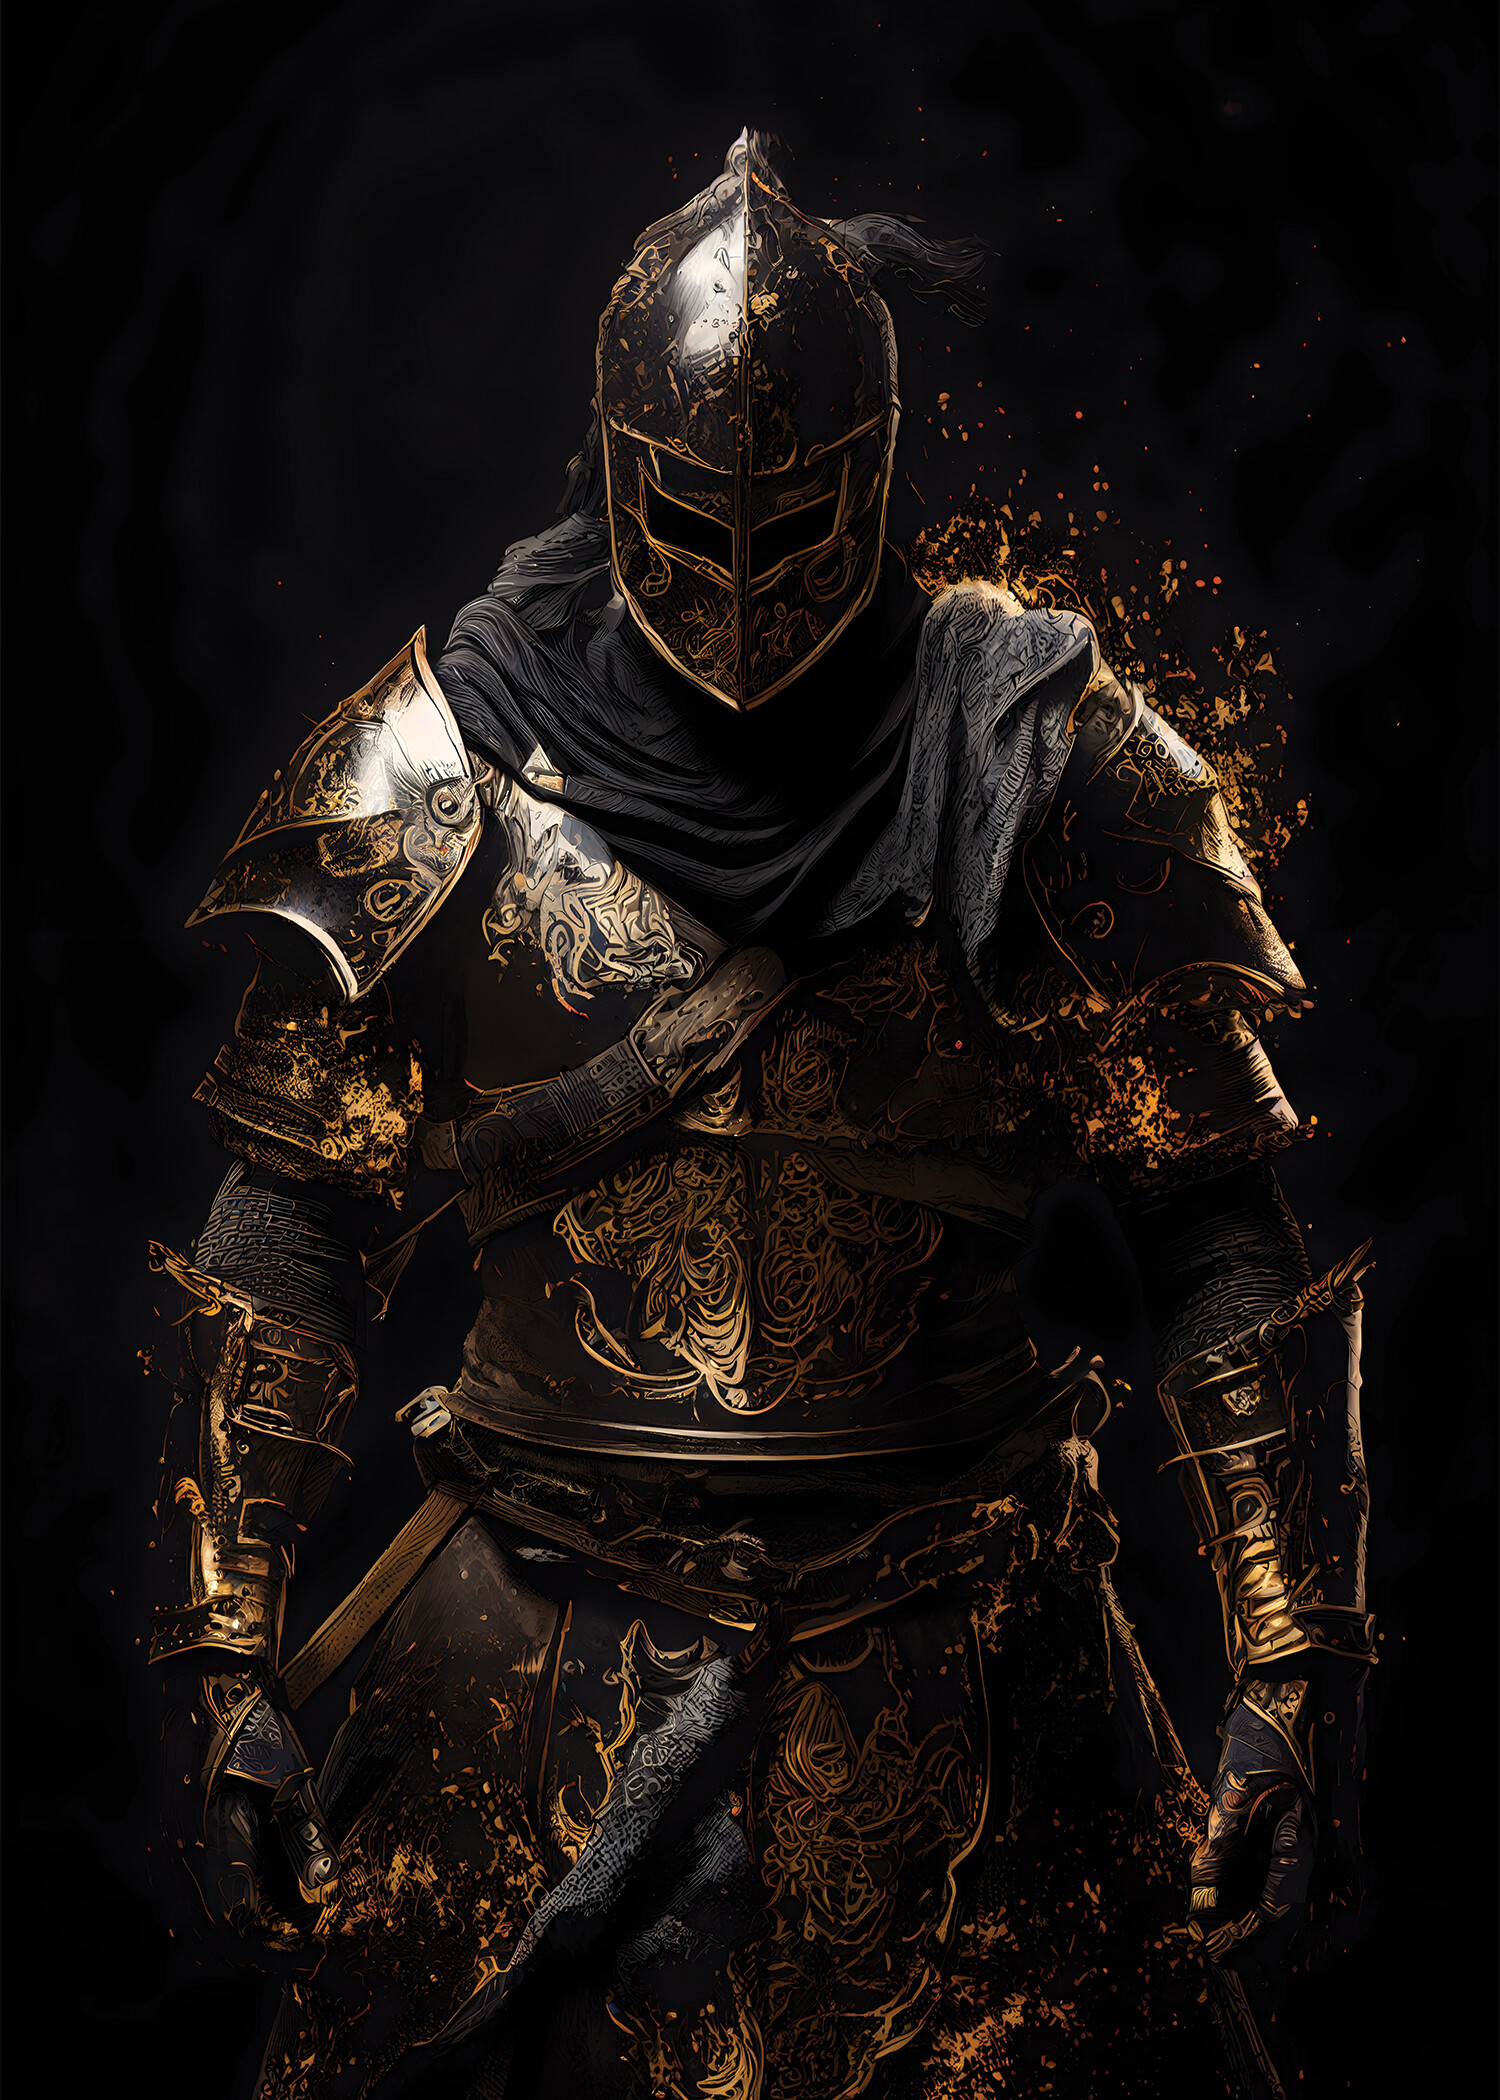 Wallpapers Medieval Knight 2560x1440 #medieval knight